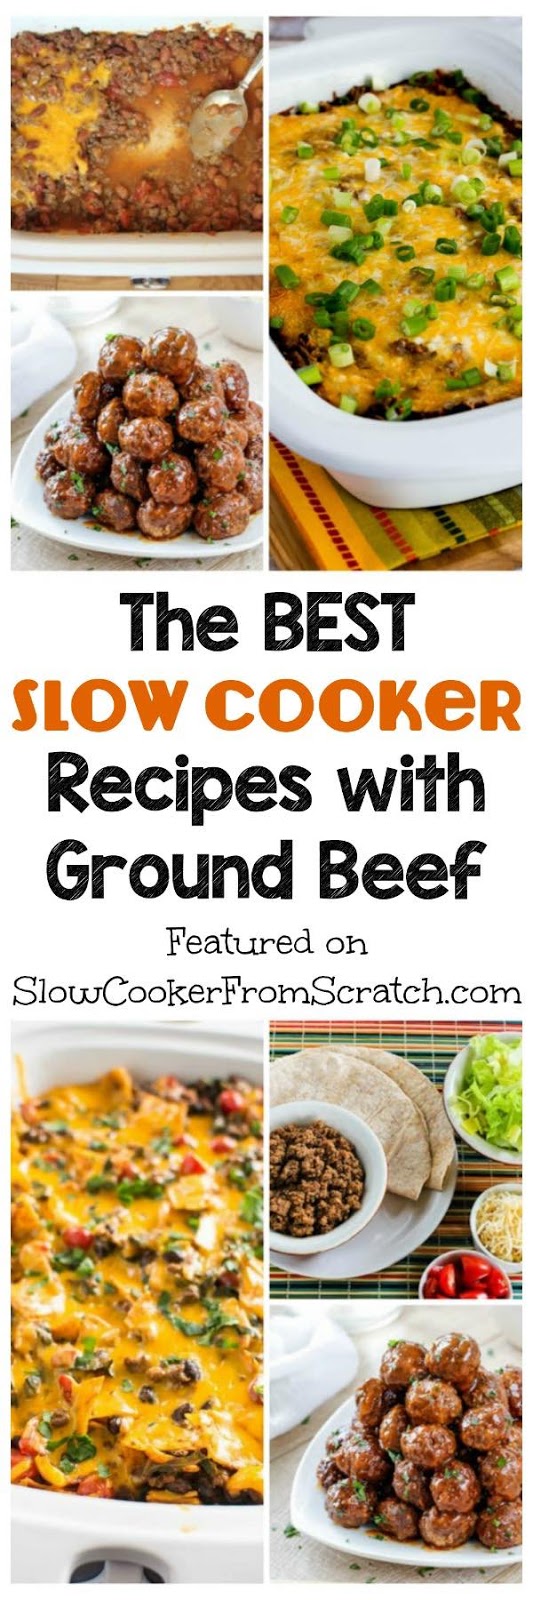 The BEST Slow Cooker Recipes with Ground Beef - Slow Cooker or Pressure ...